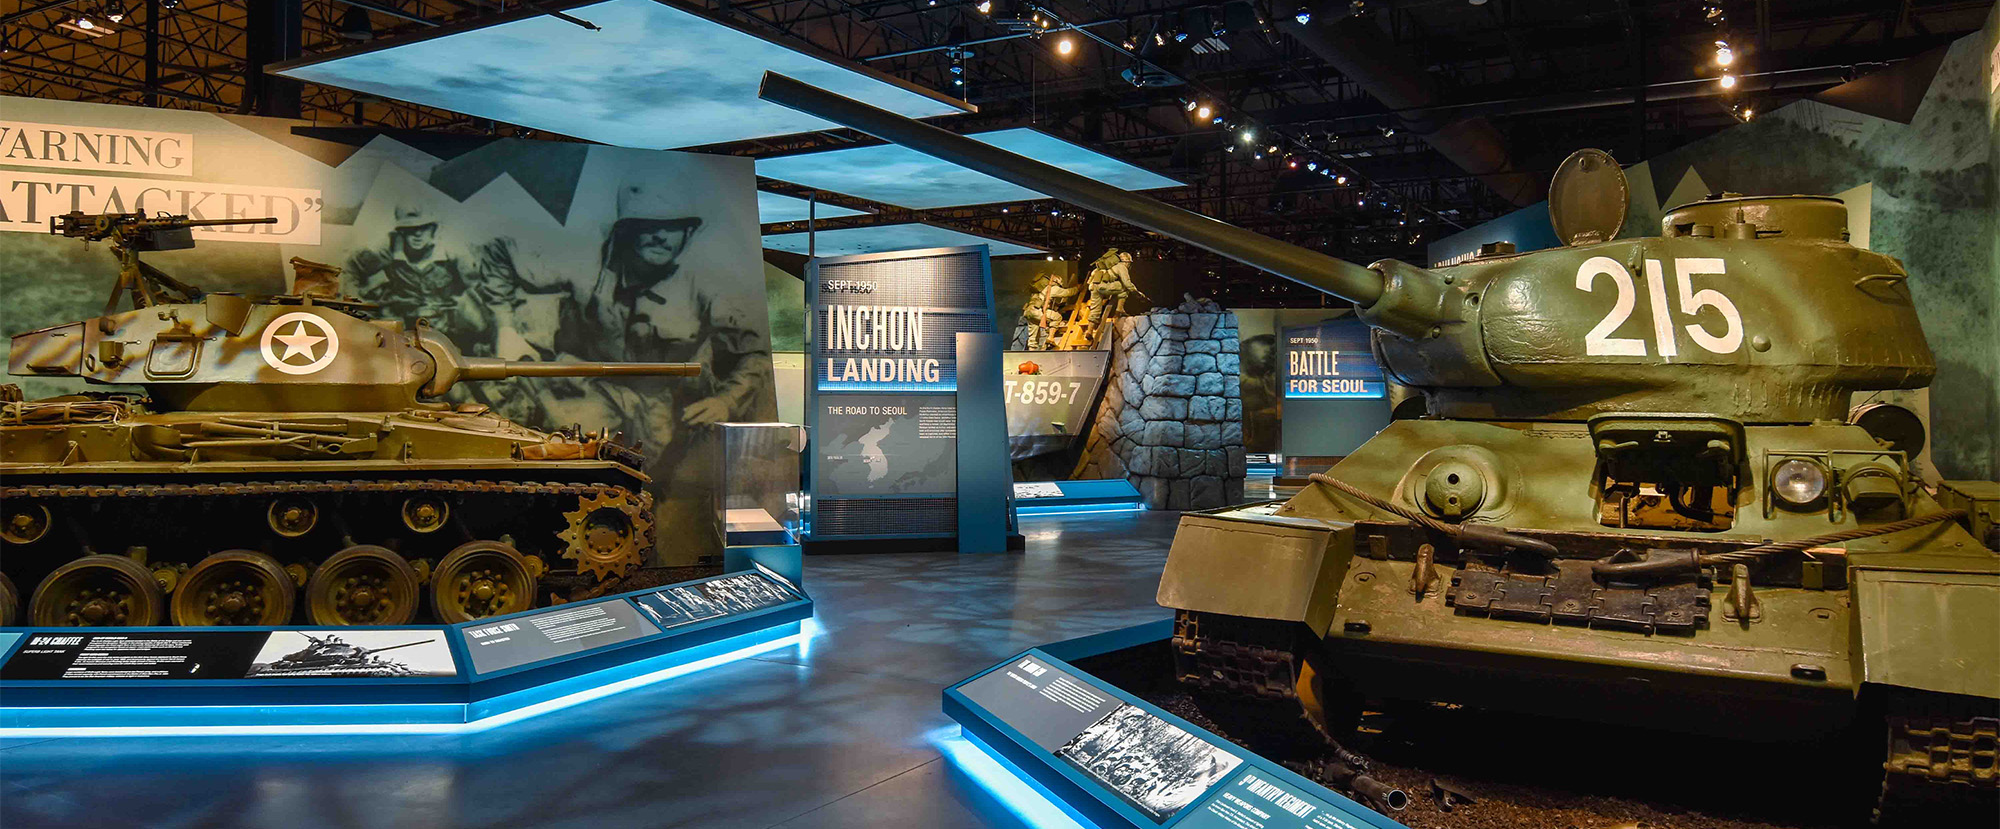 National Museum of Military Vehicles - Photo Credit Warren Kong from Lightswitch